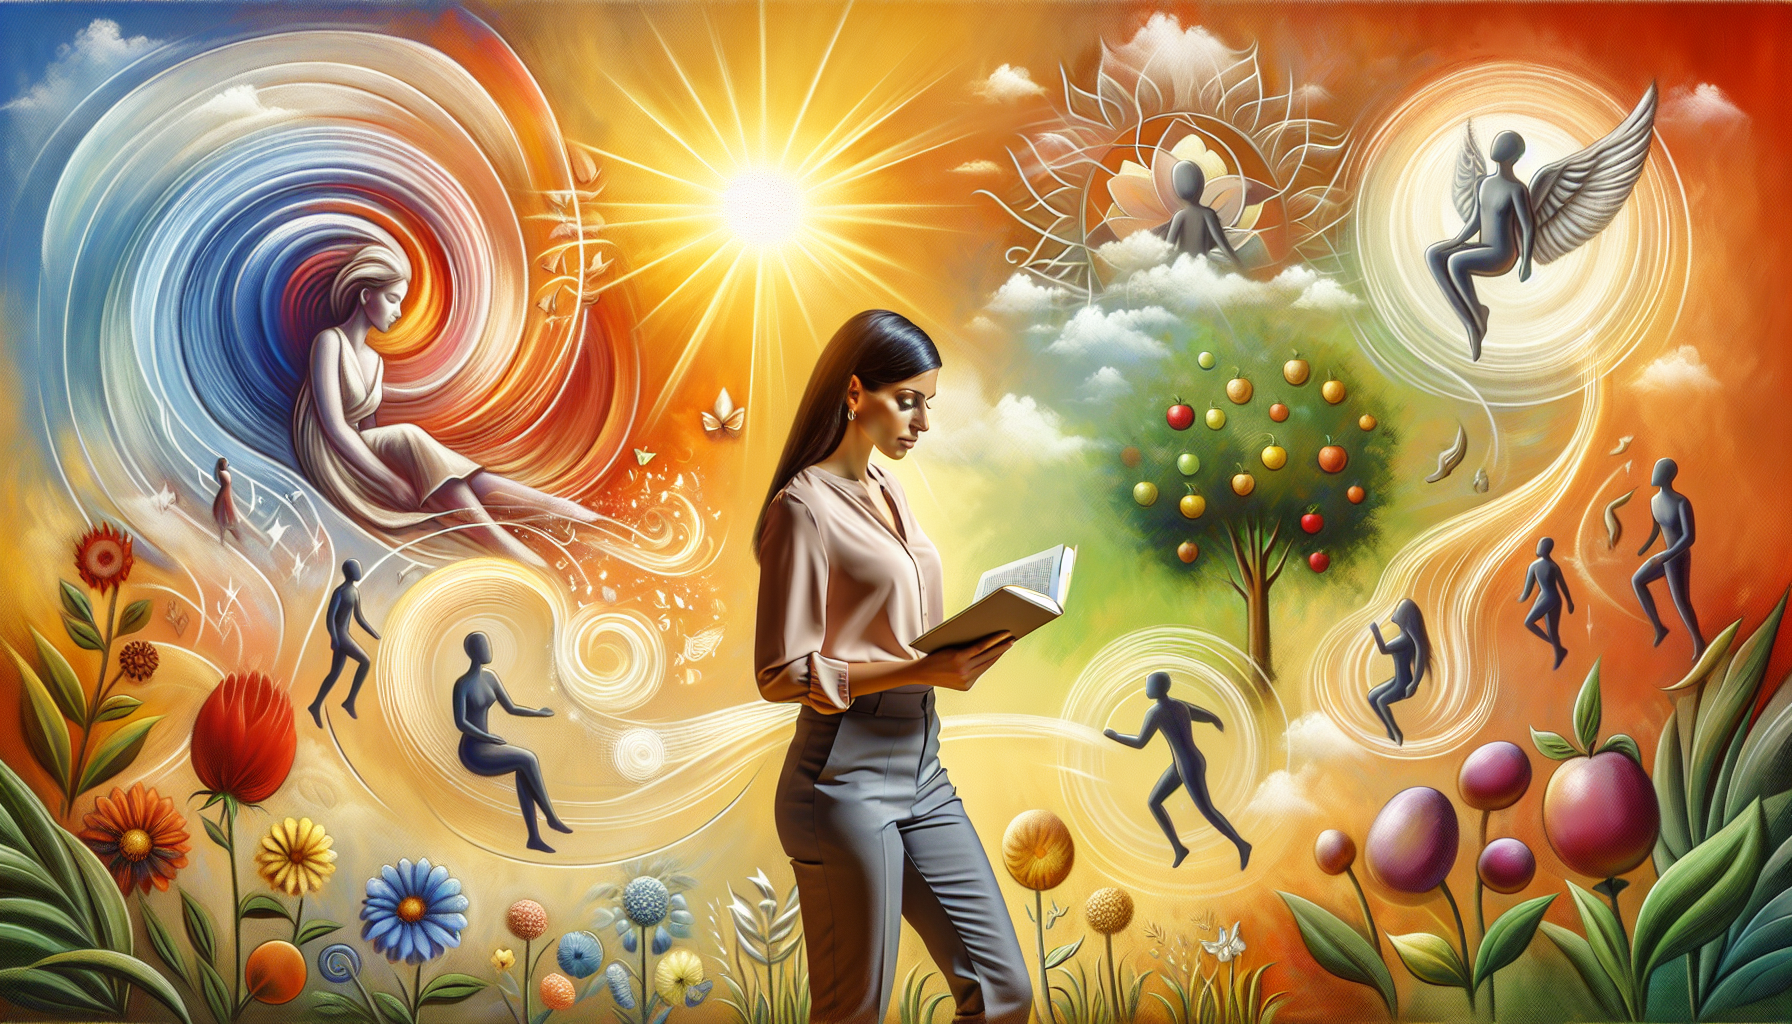 Depict a scene of a woman of Hispanic descent, wearing smart casual attire, standing in the center, reading a book titled 